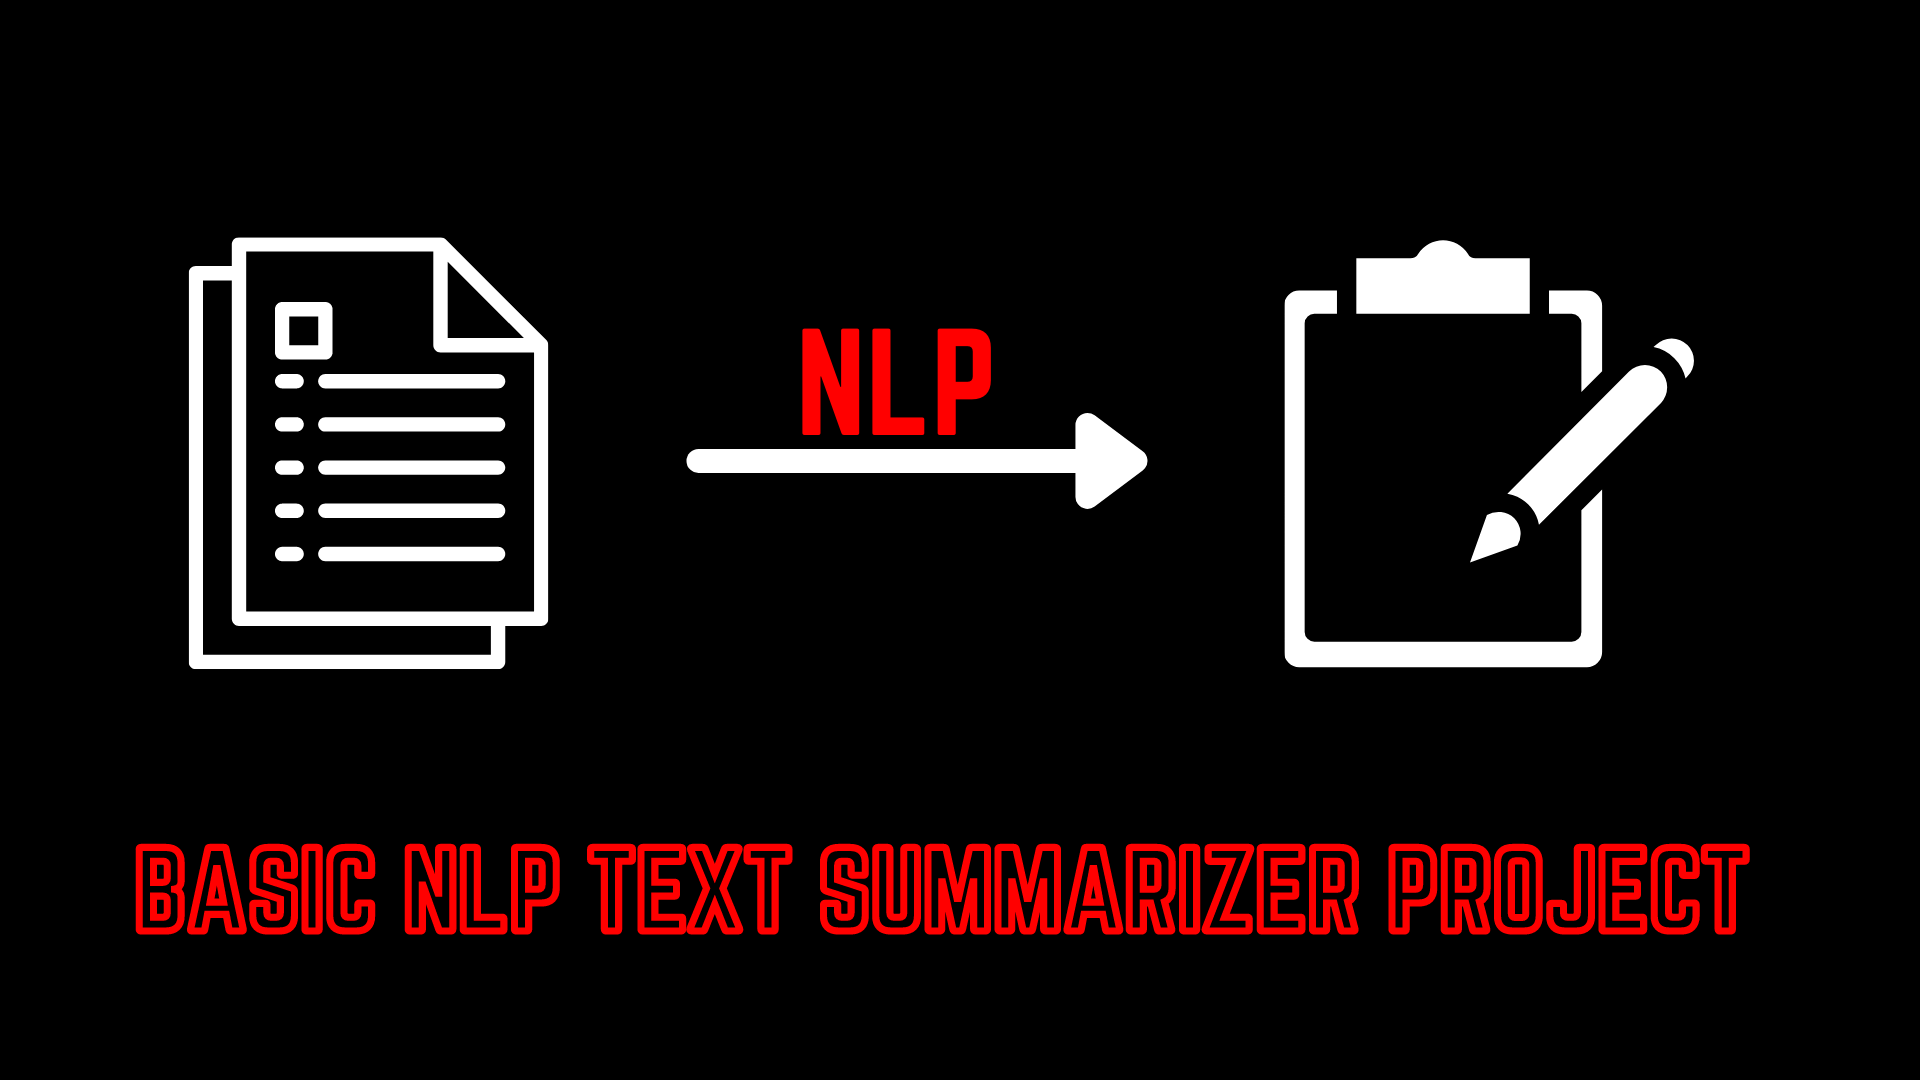 nlp text summarizer project feautred image Programming projects,python projects,Machine learning projects,Datascience projects